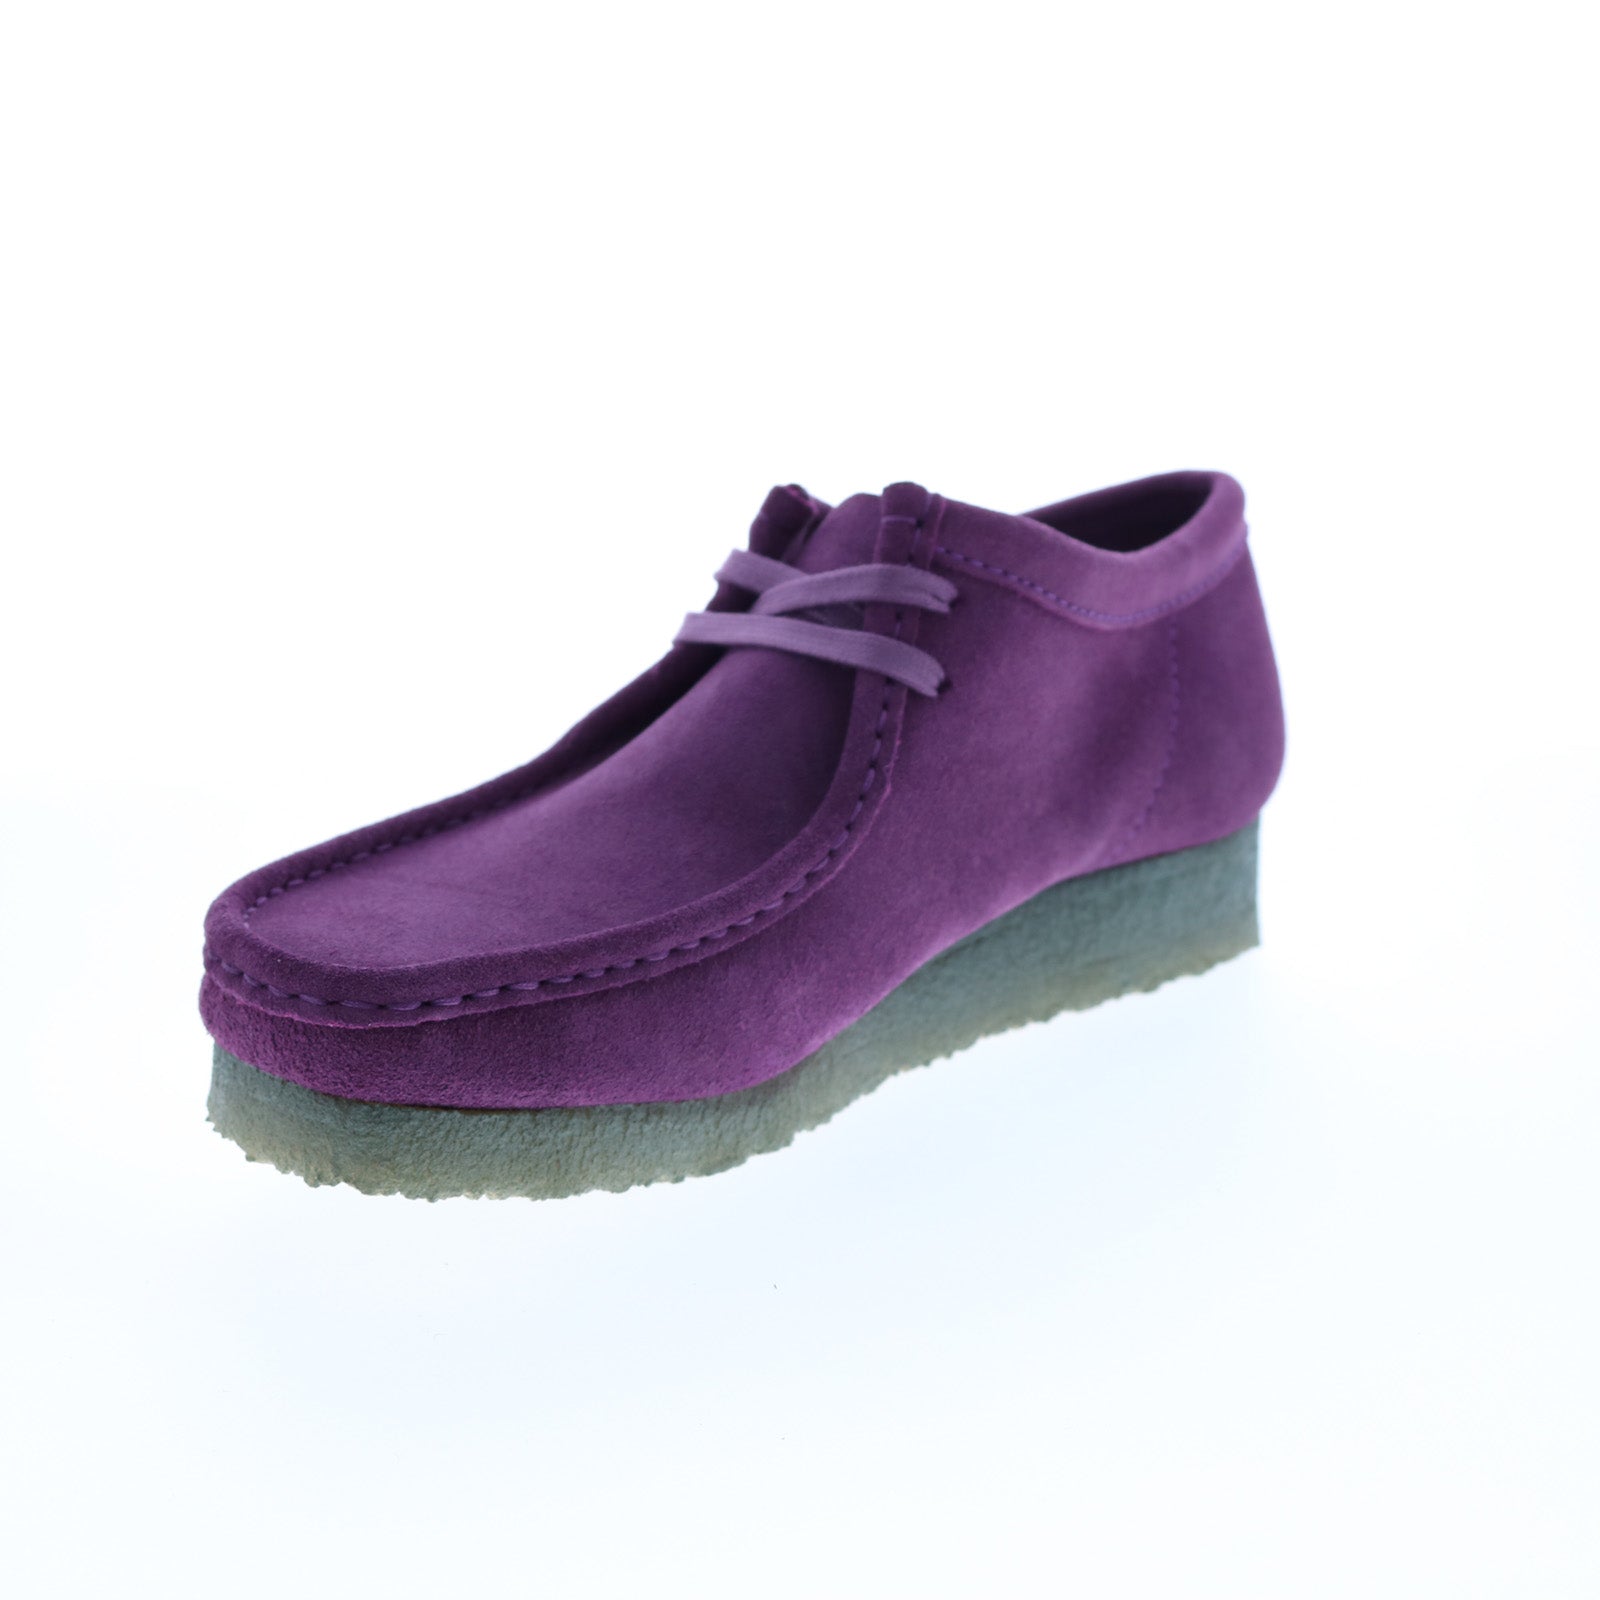 Clarks Wallabee 26168860 Mens Purple Suede Oxfords & Lace Ups Casual S ...